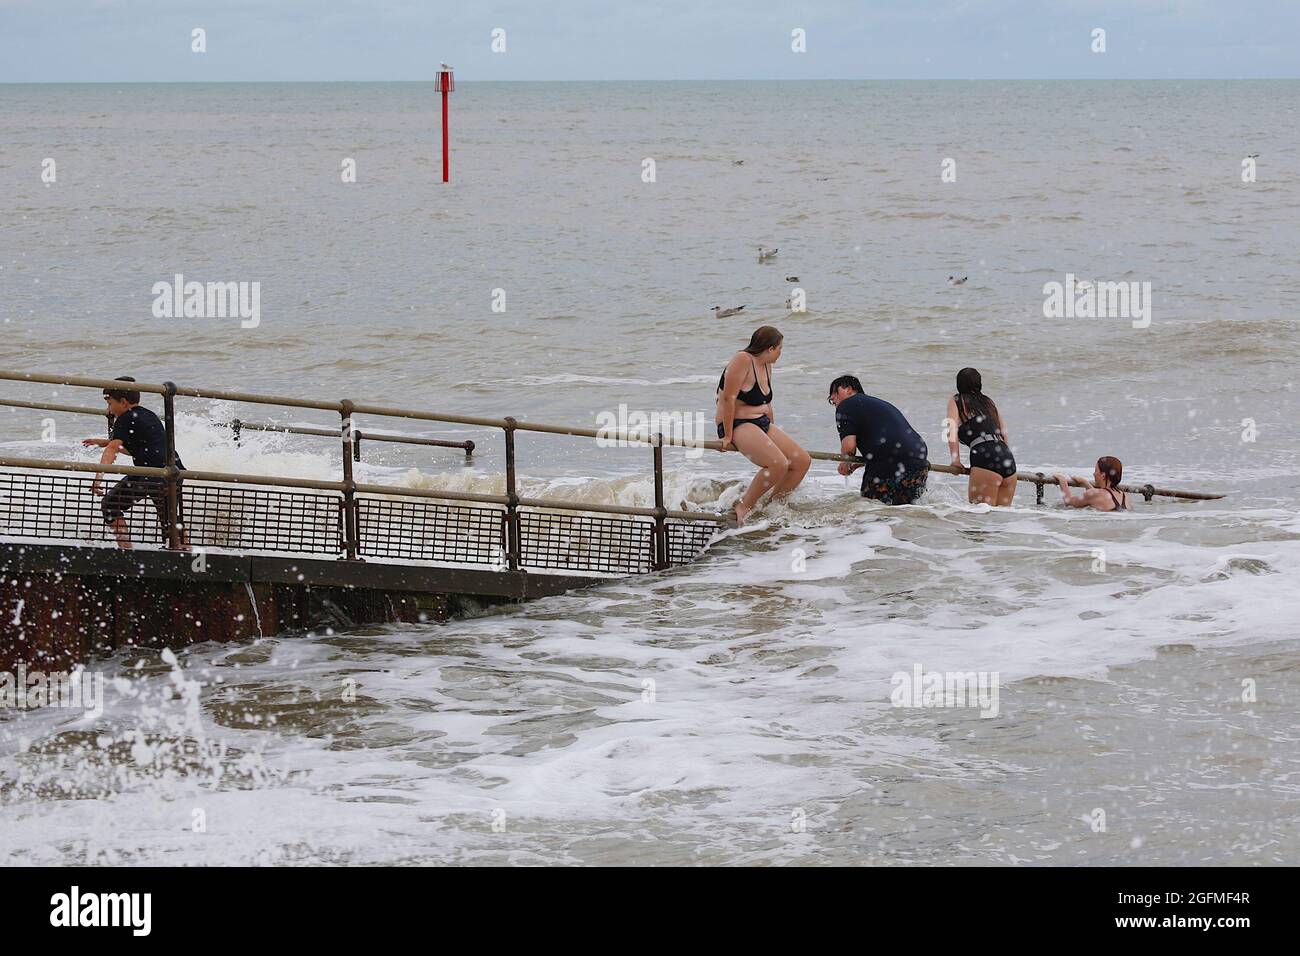 Dymchurch, Kent, UK. 26 Aug, 2021. UK Weather: Overcast and windy in the seaside town of Dymchurch in Kent as brits on staycation enjoy splashing about in the sea. Photo Credit: Paul Lawrenson/ Alamy Live News Stock Photo